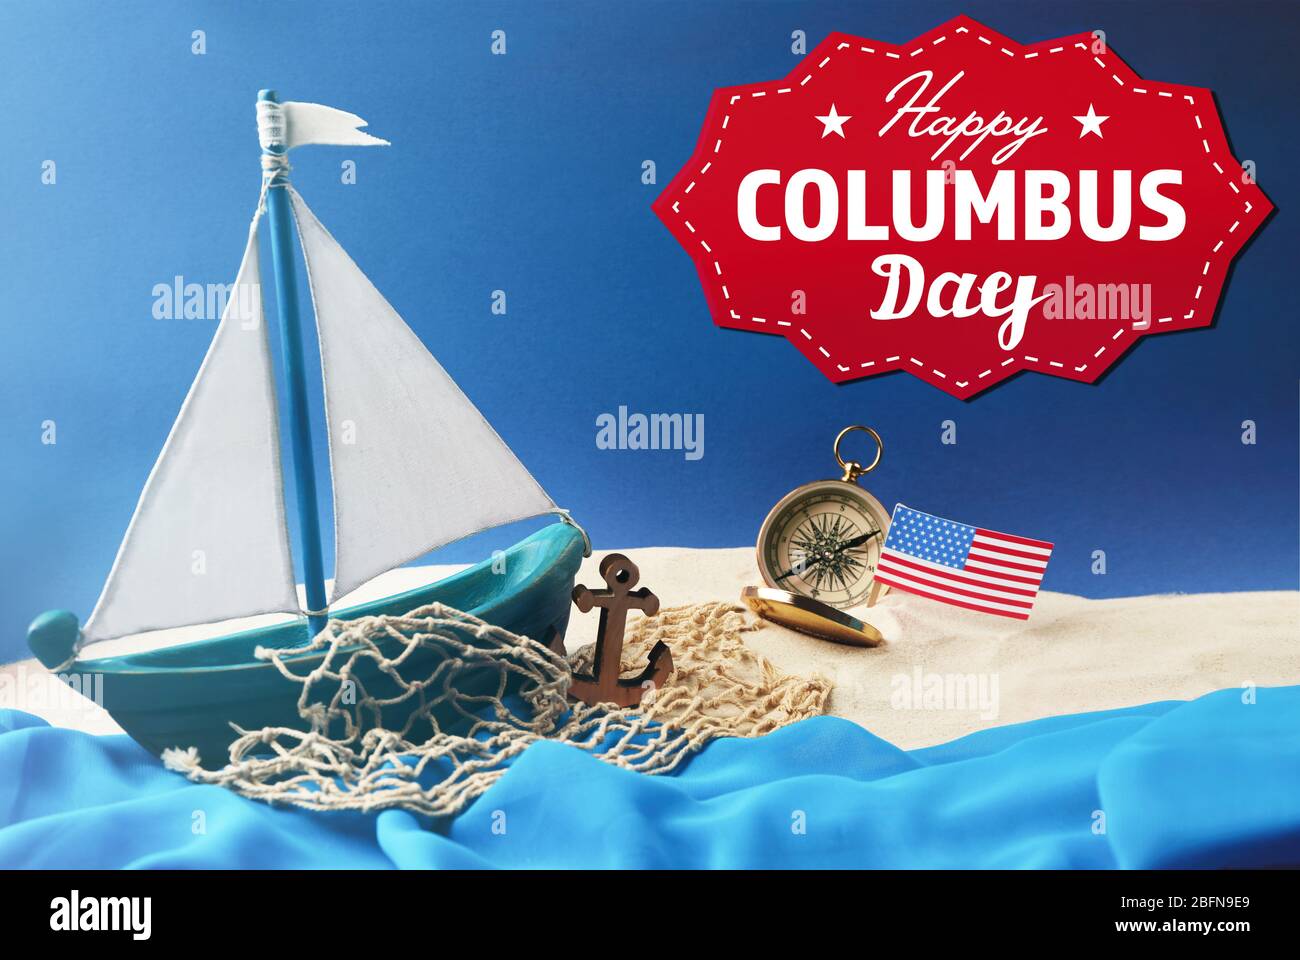 Text HAPPY COLUMBUS DAY with wooden boat and net on blue background. National holiday concept. Stock Photo